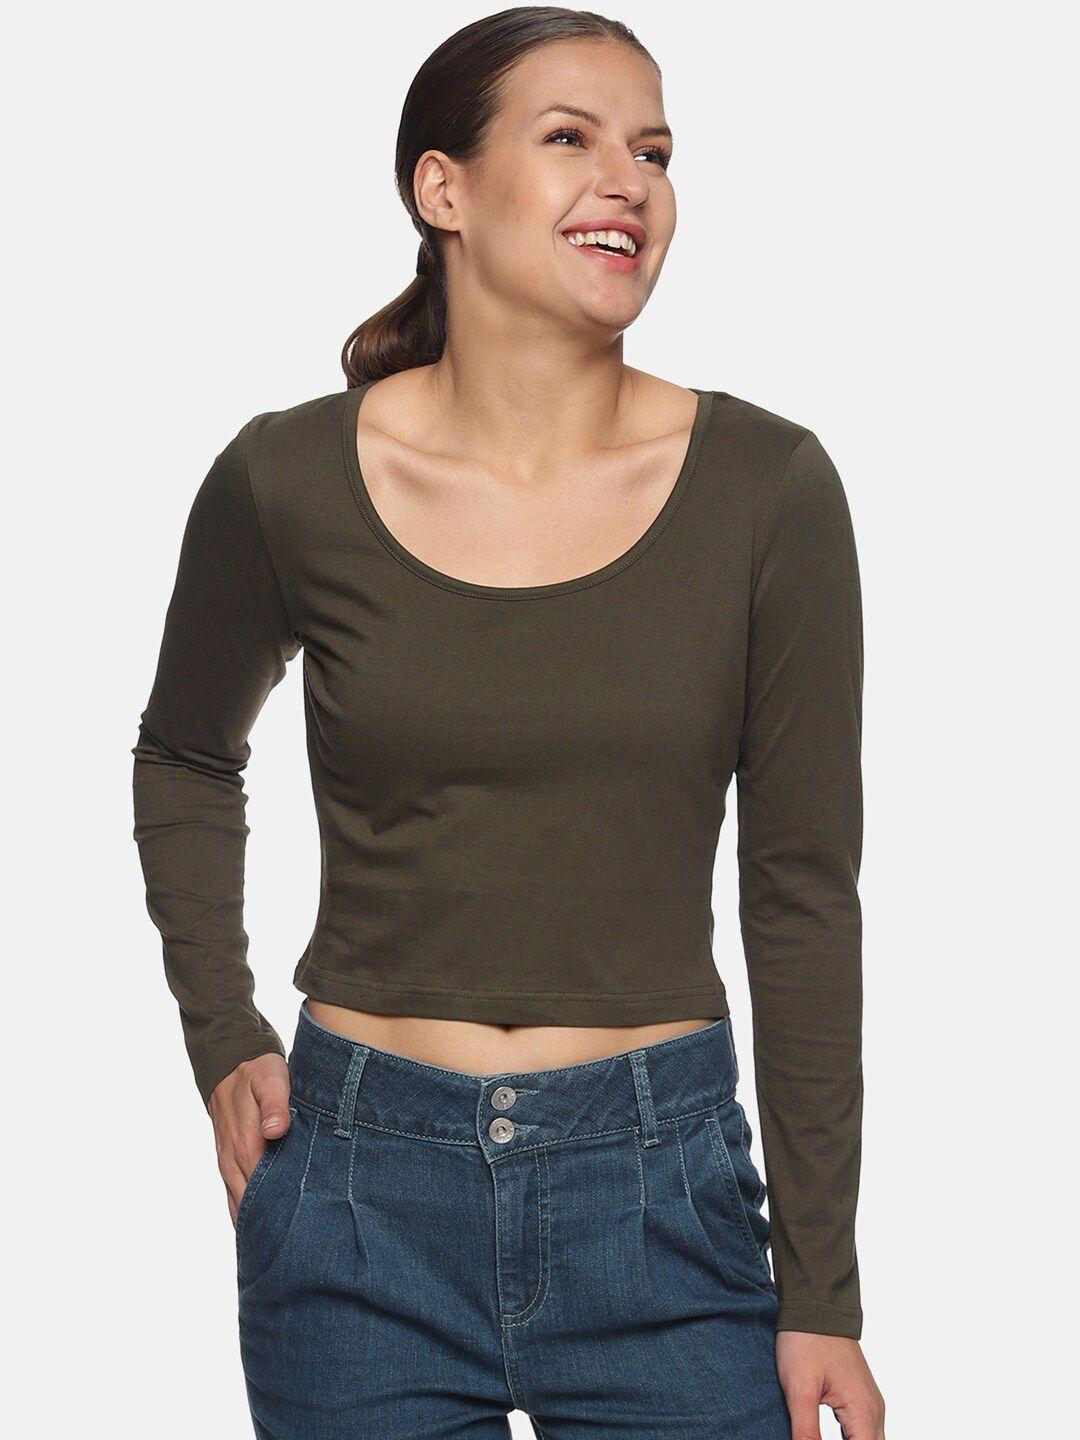 trends tower women olive green pure cotton t-shirt